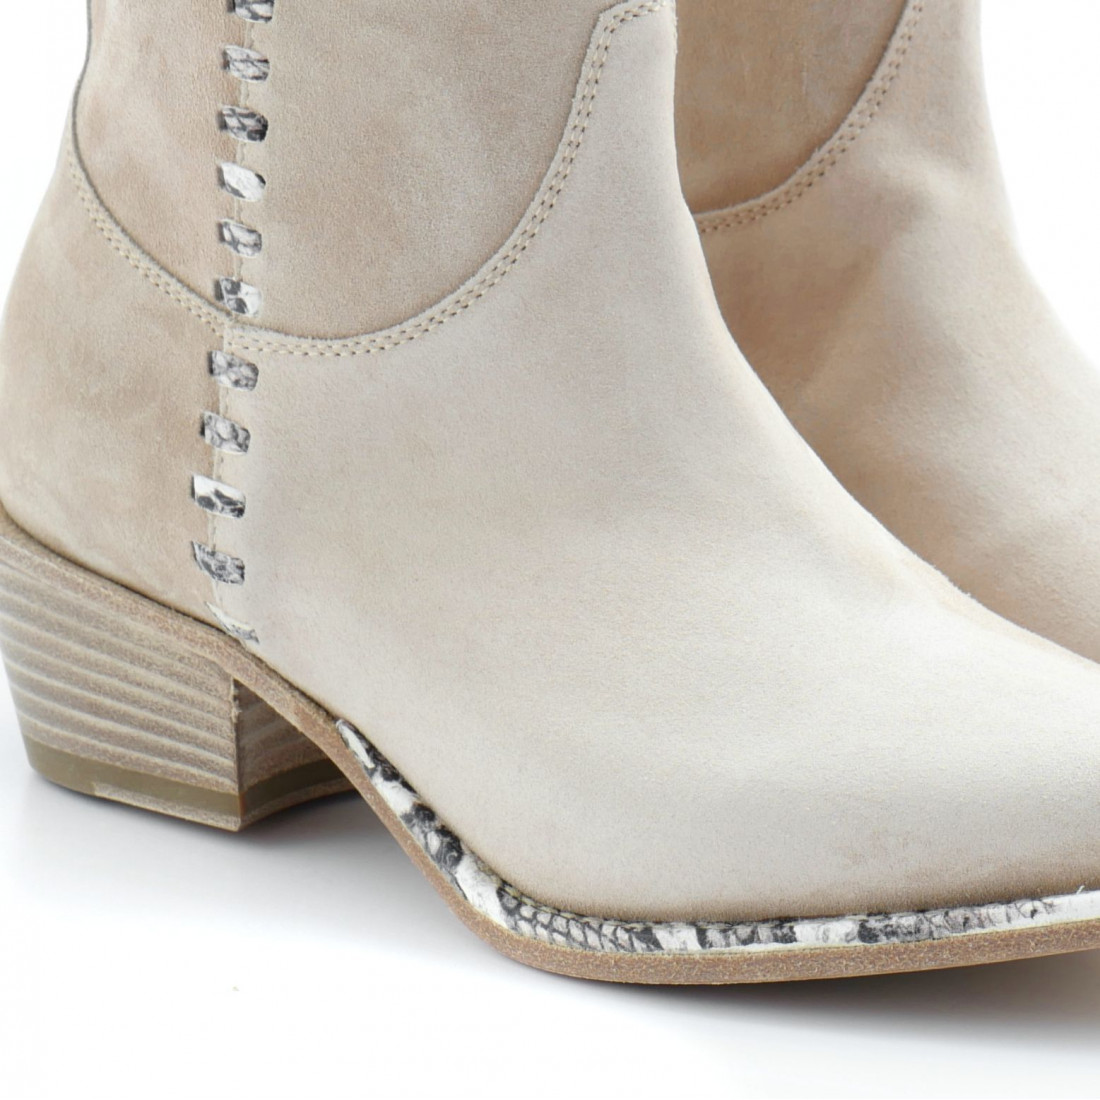 Laura Bellariva Womens Camperos Ankle Boot In Beige Leather